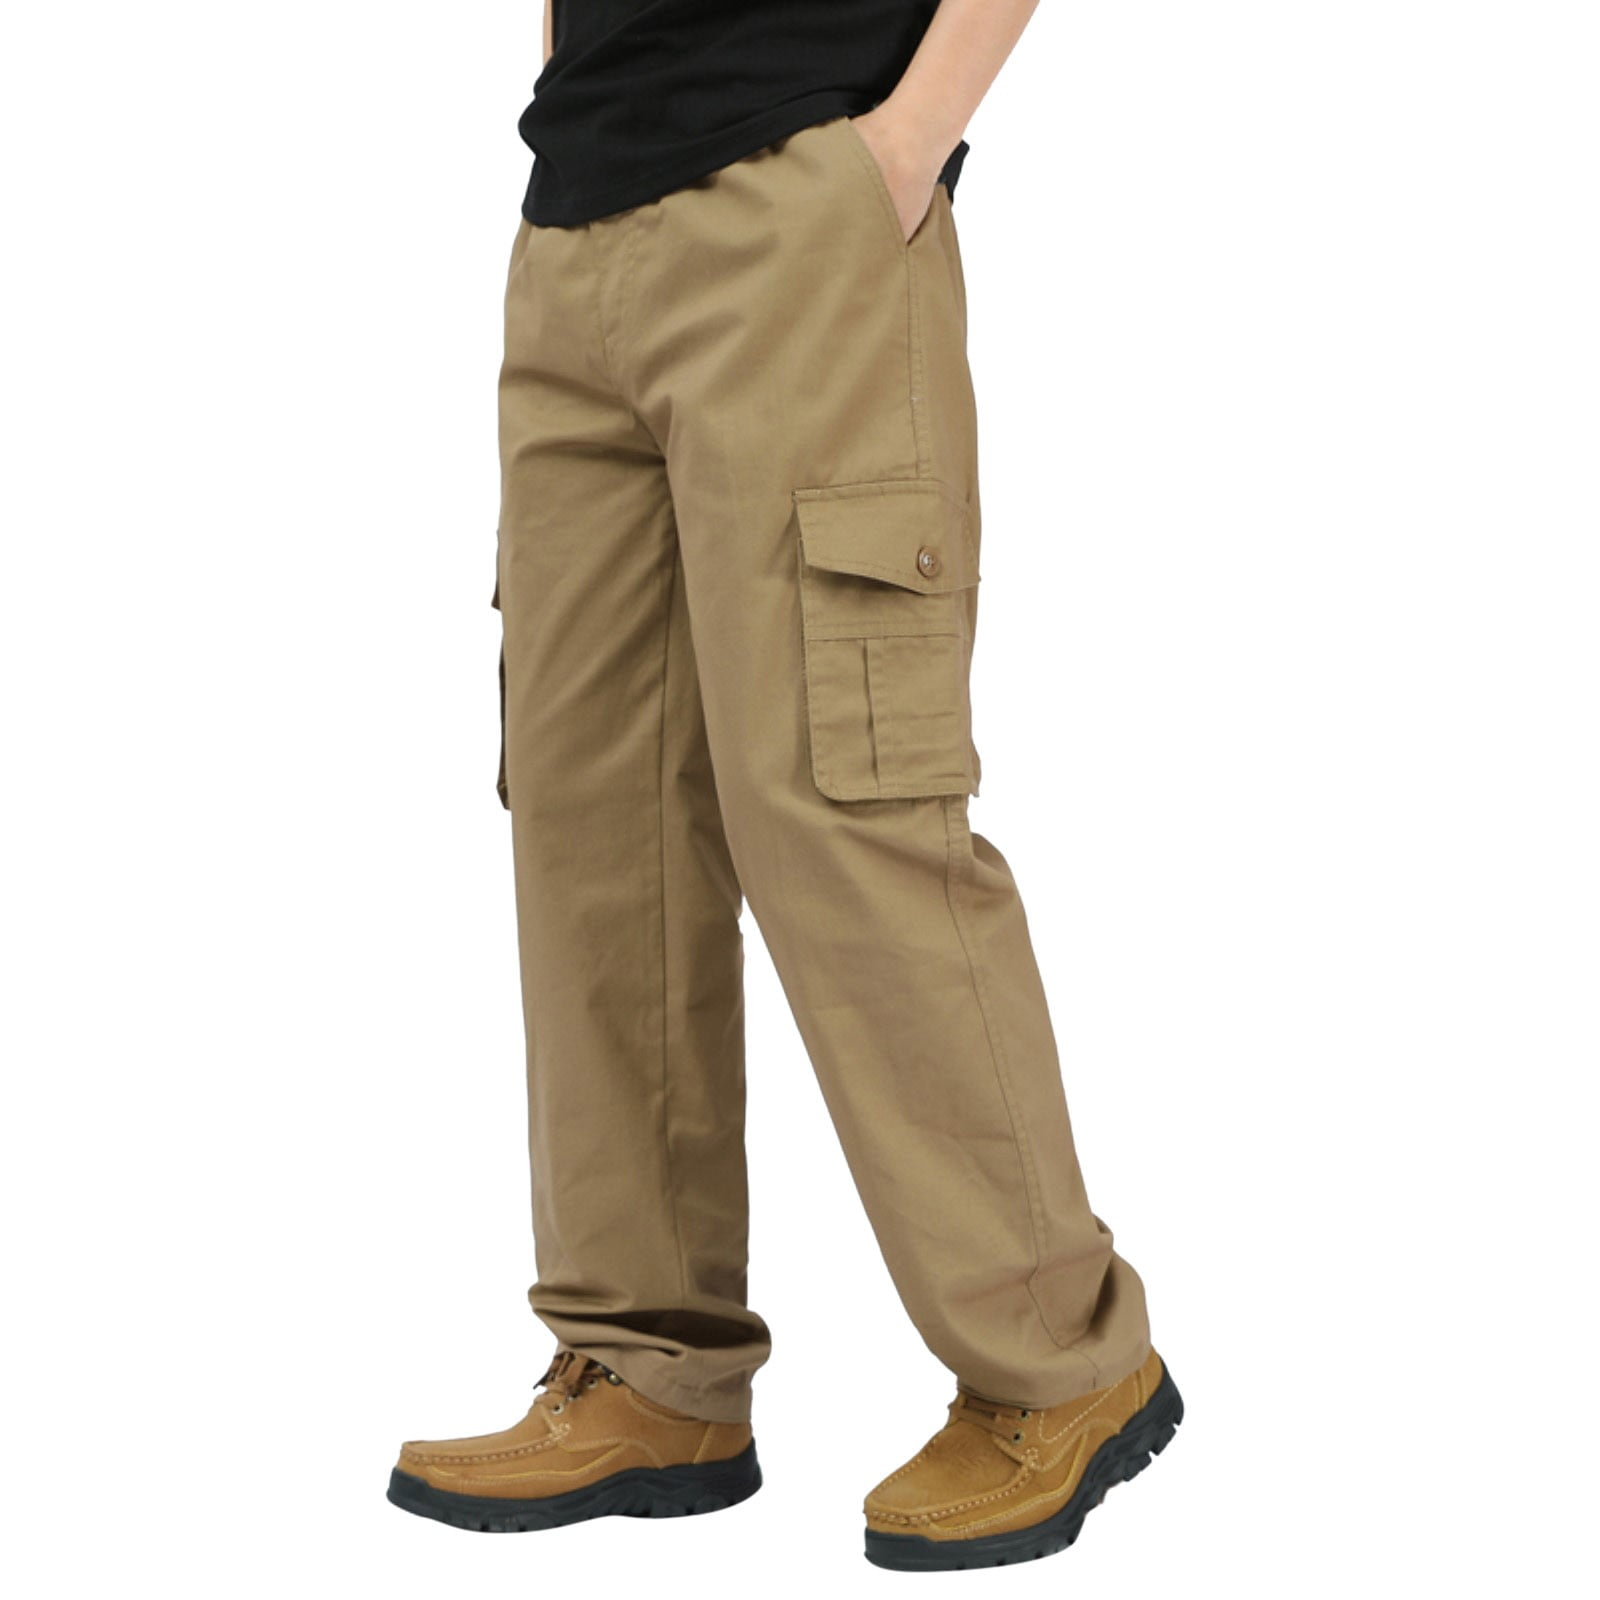 Relaxed Fit Tailored trousers - Dark brown - Men | H&M GB